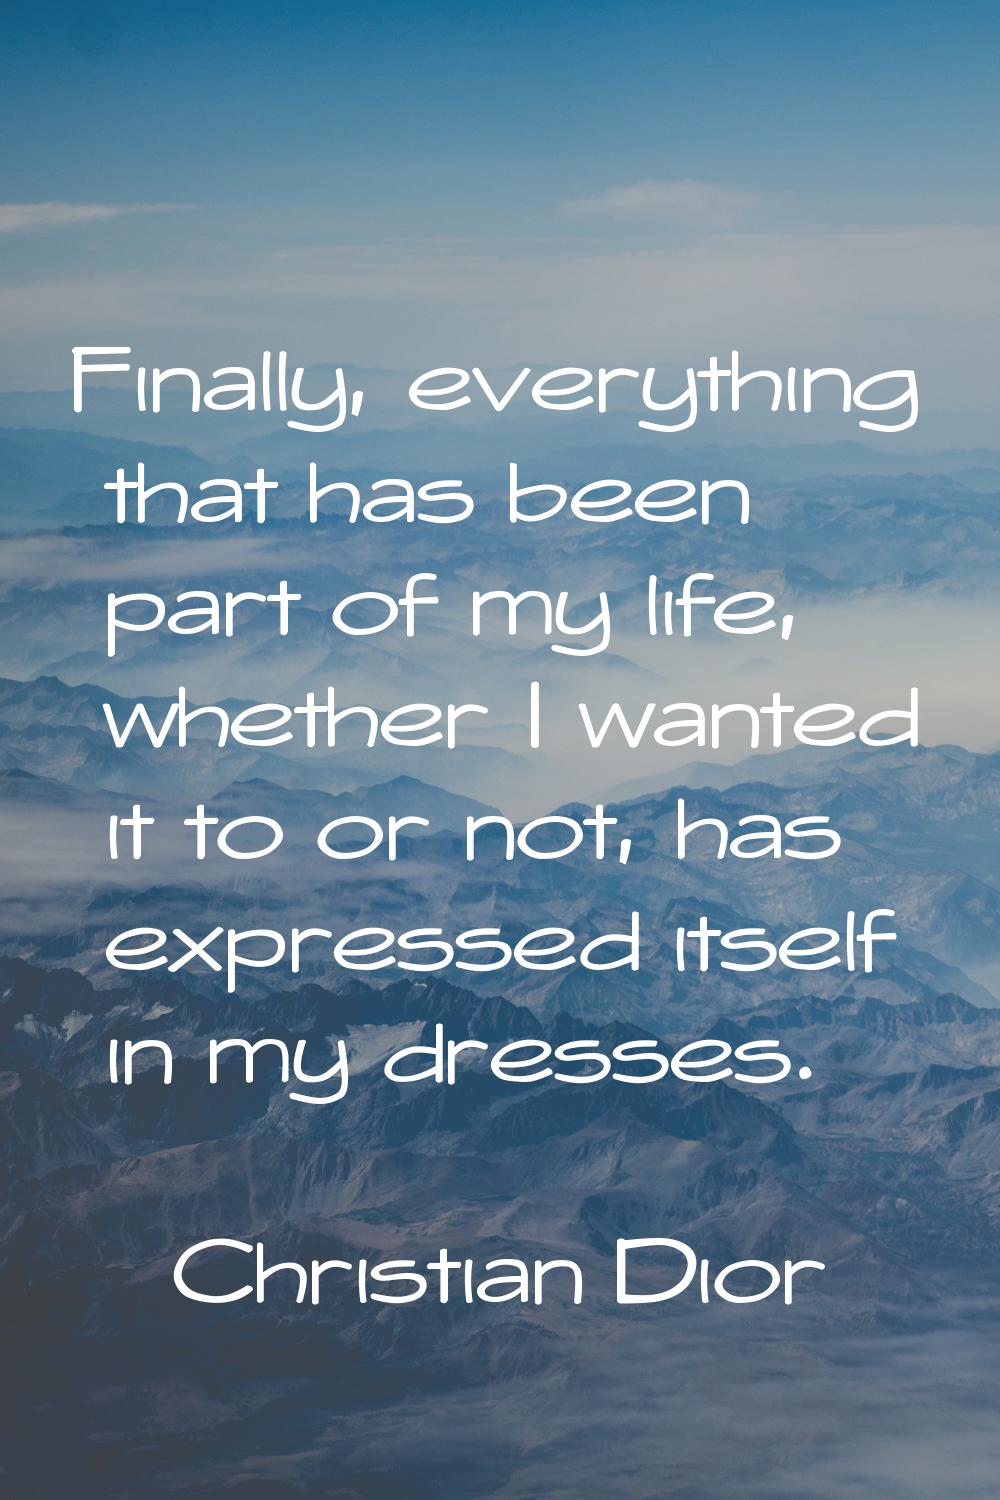 Finally, everything that has been part of my life, whether I wanted it to or not, has expressed its